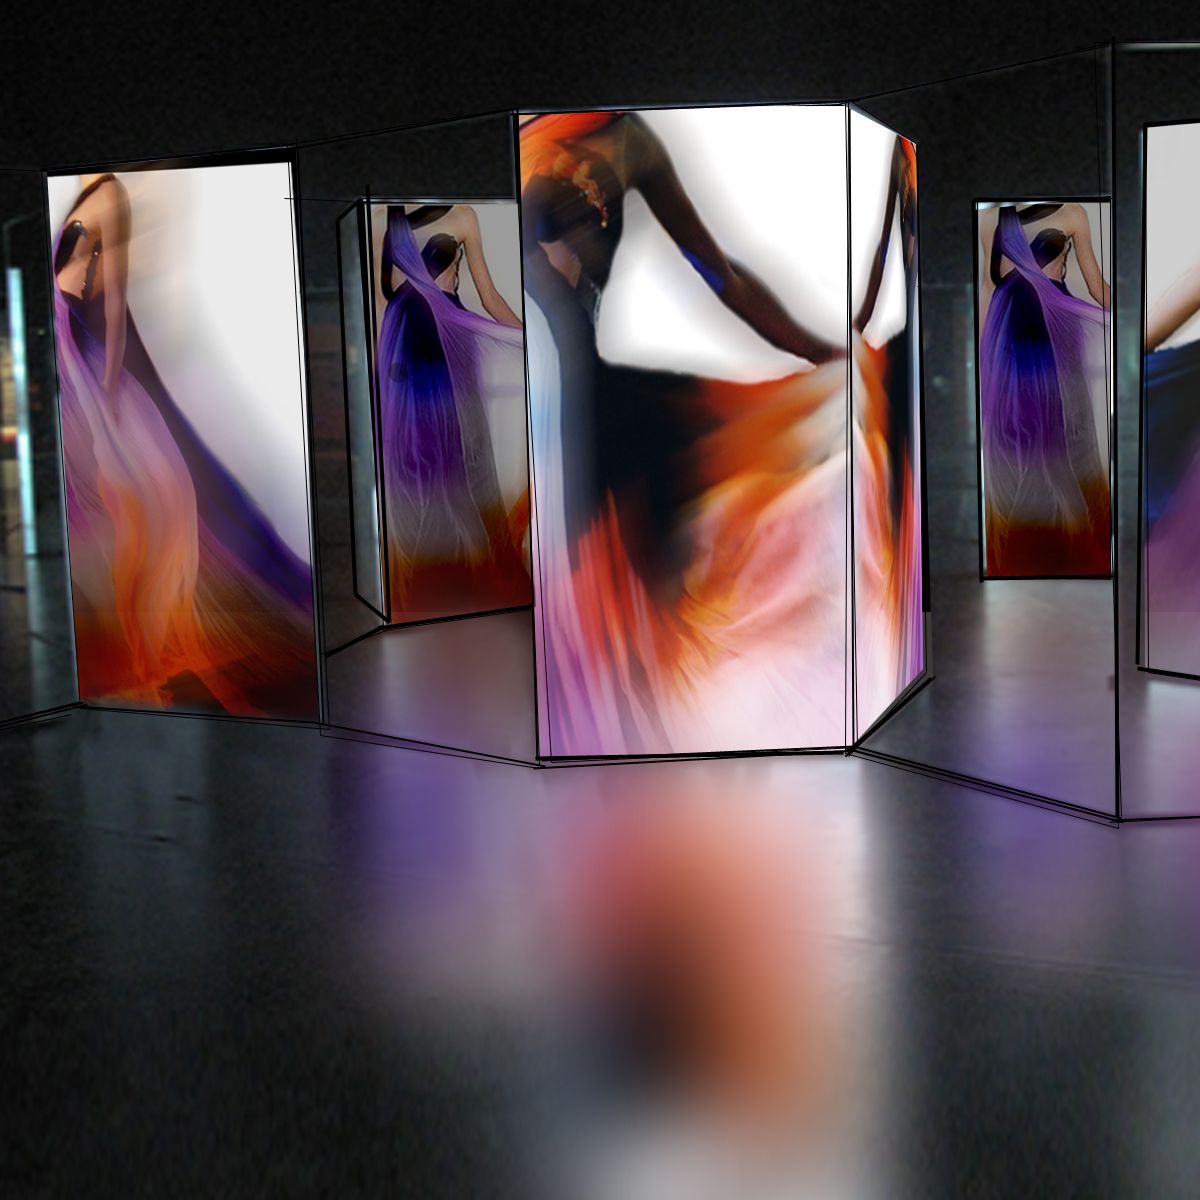 A dark room with lit up panels showing dresses, blurred to give the feeling of movement. MA Fashion Curation, Multimedia Installation by Daniel Caulfield-Sriklad